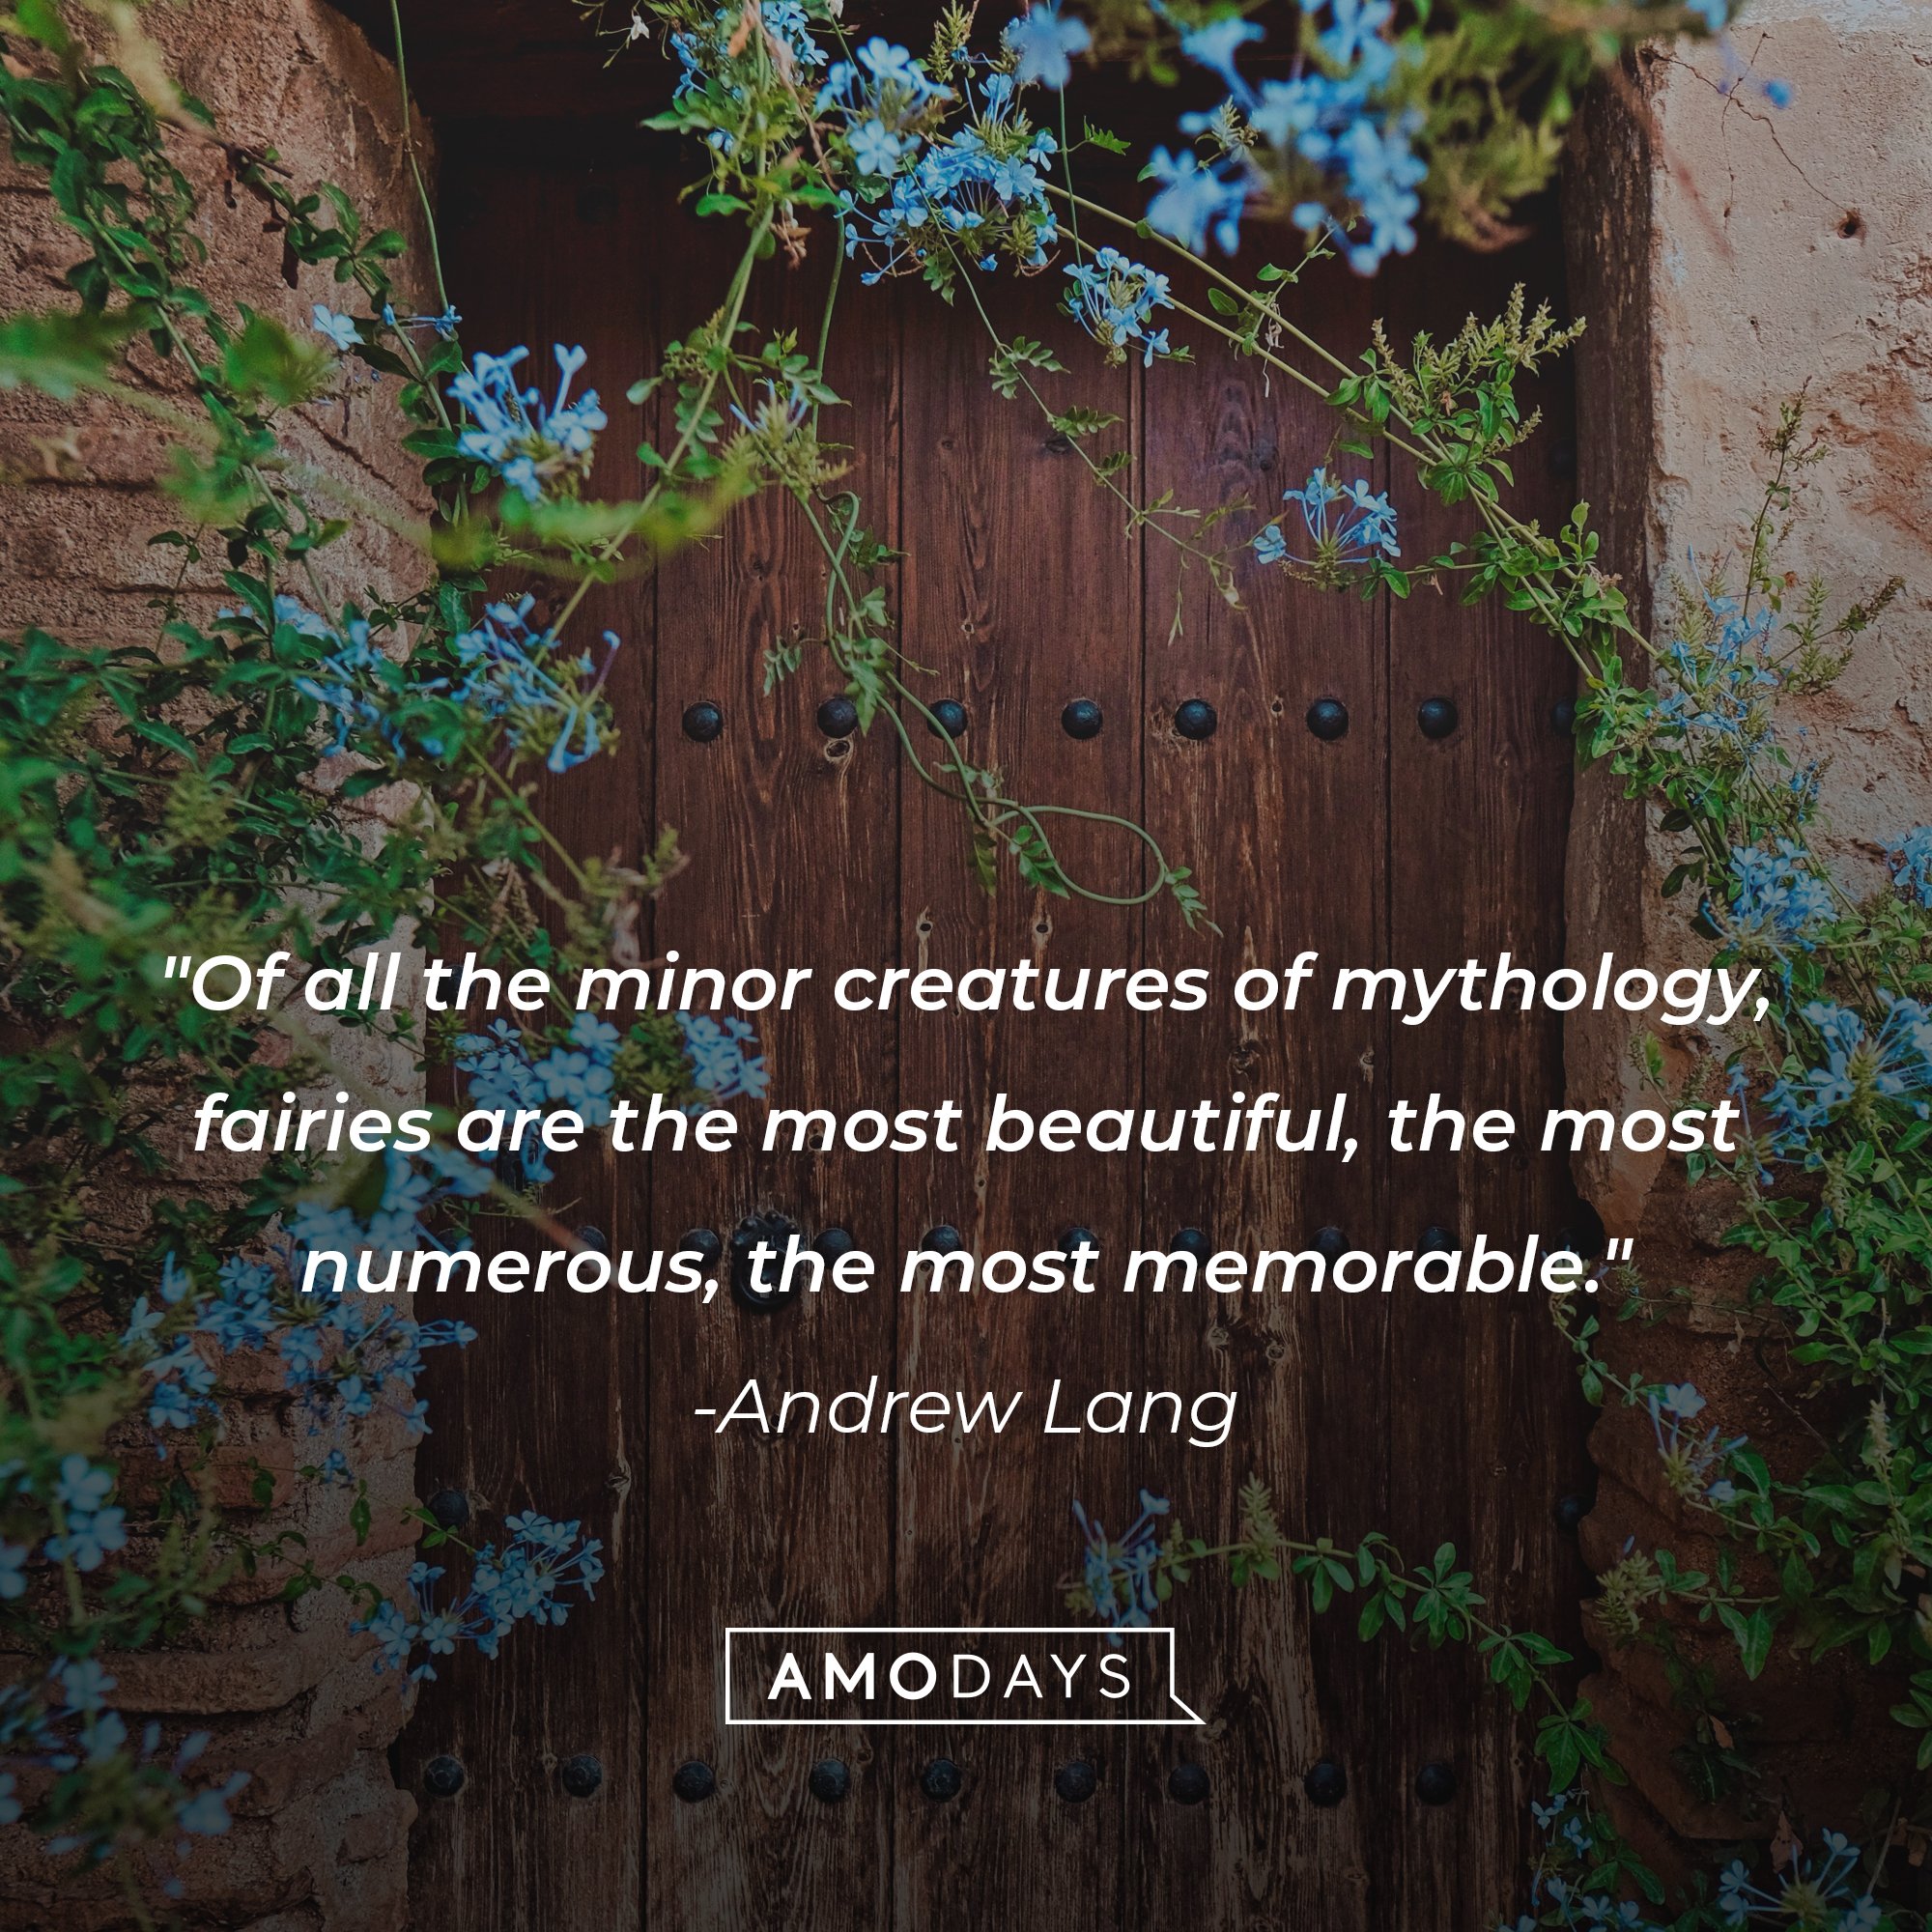 Andrew Lang's quote: "Of all the minor creatures of mythology, fairies are the most beautiful, the most numerous, the most memorable." | Image: Amo Days